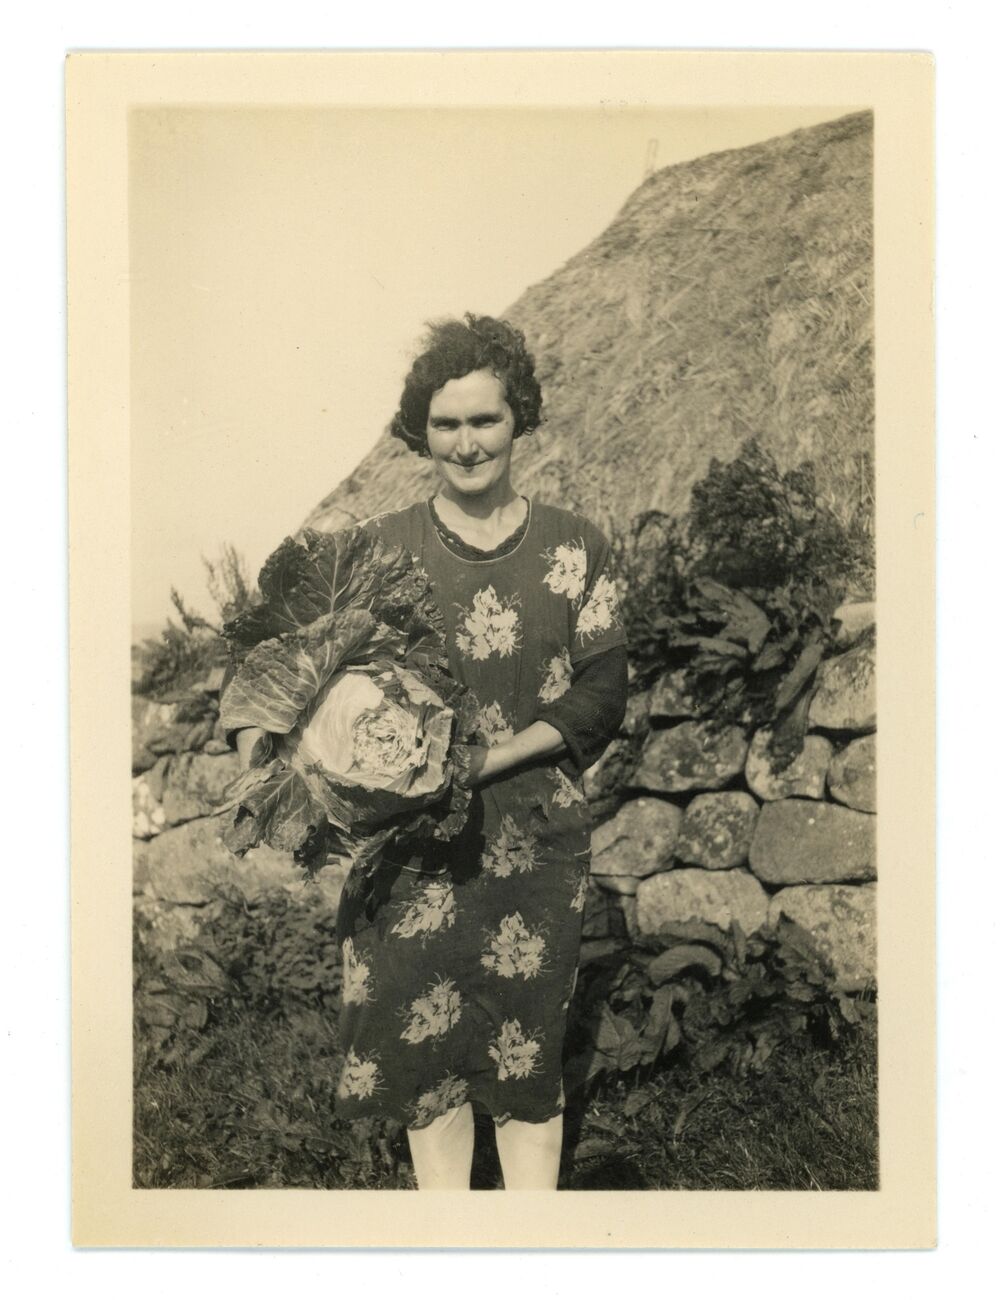 A black and white photo of a woman holding a very large cabbage, standing outside a thatched cottage. She is wearing a printed floral dress.